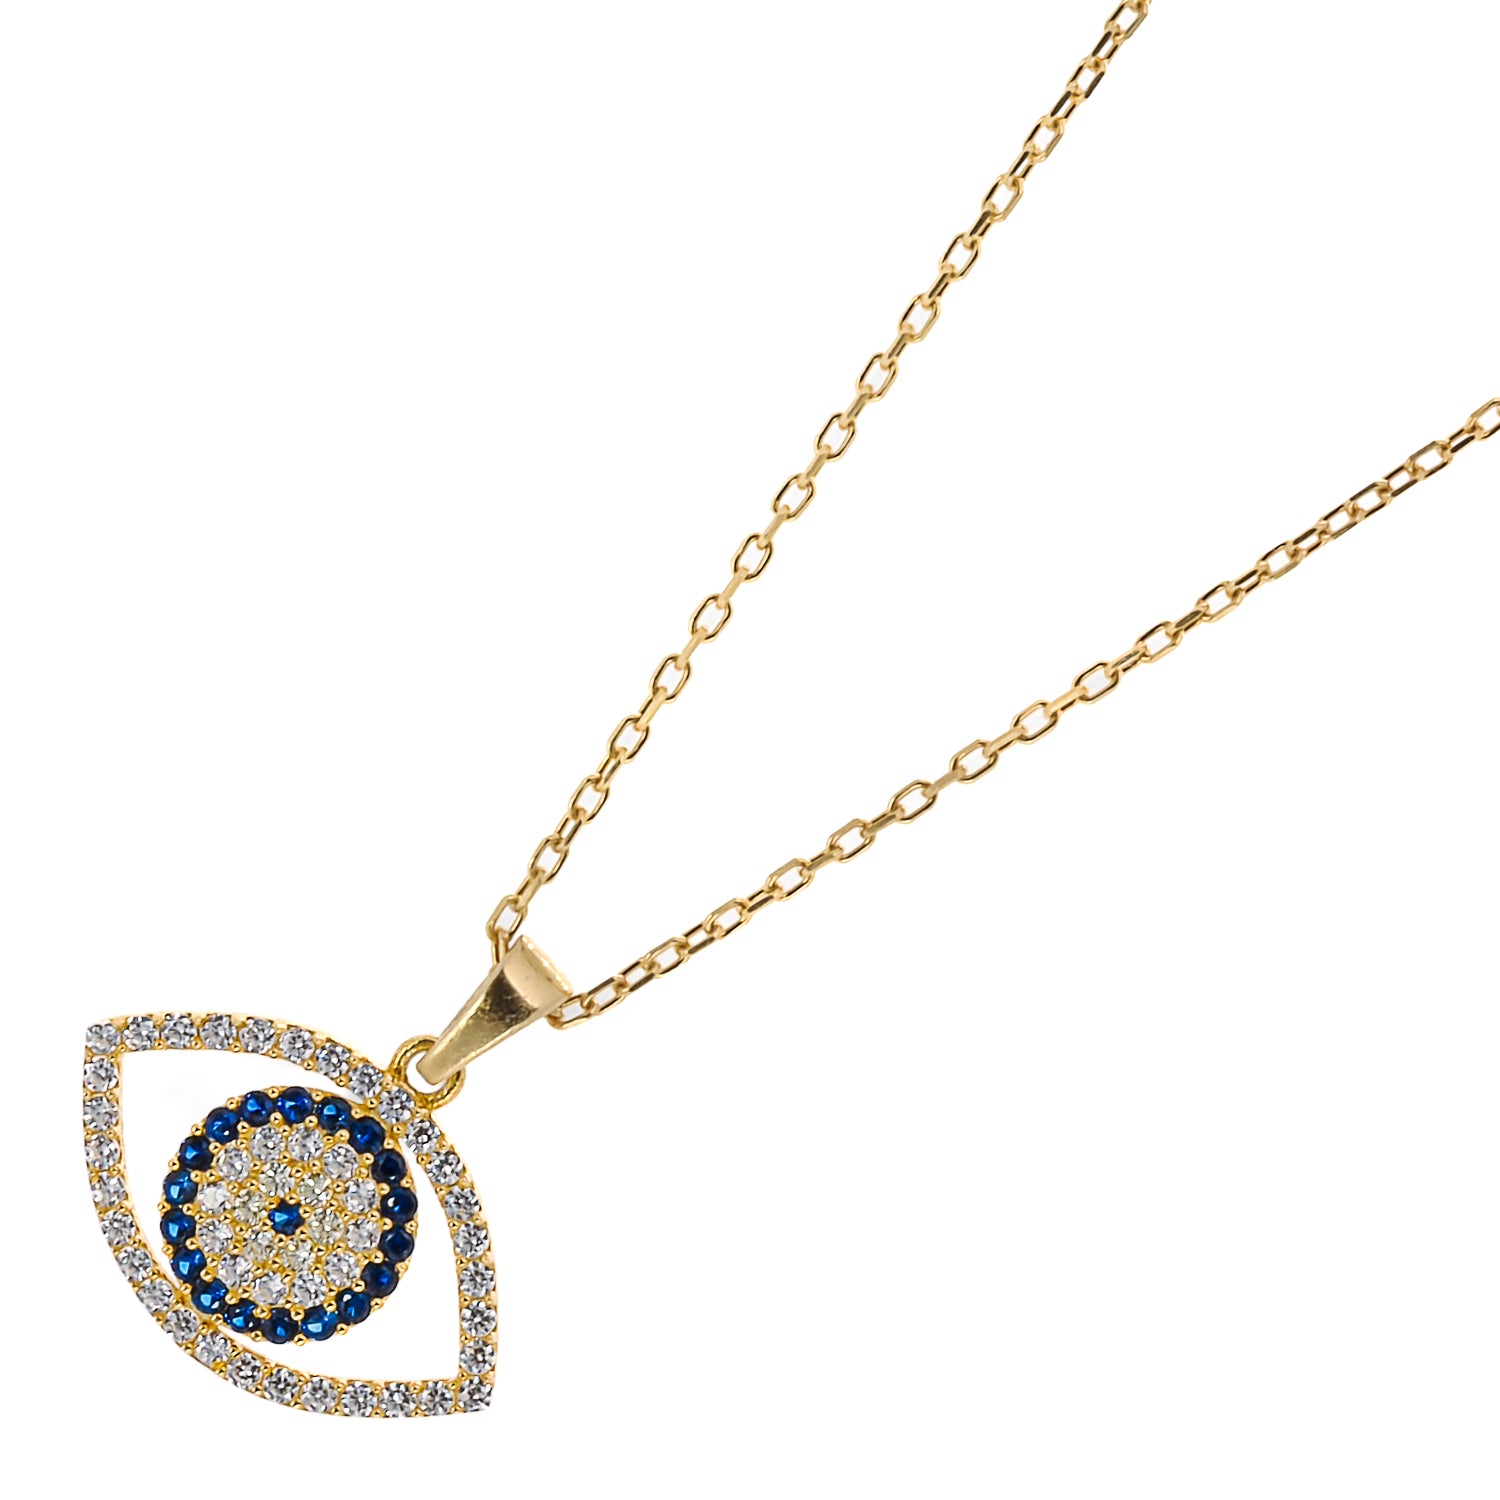 The elegant 925 Sterling silver chain of the Sparkly Evil Eye Necklace.